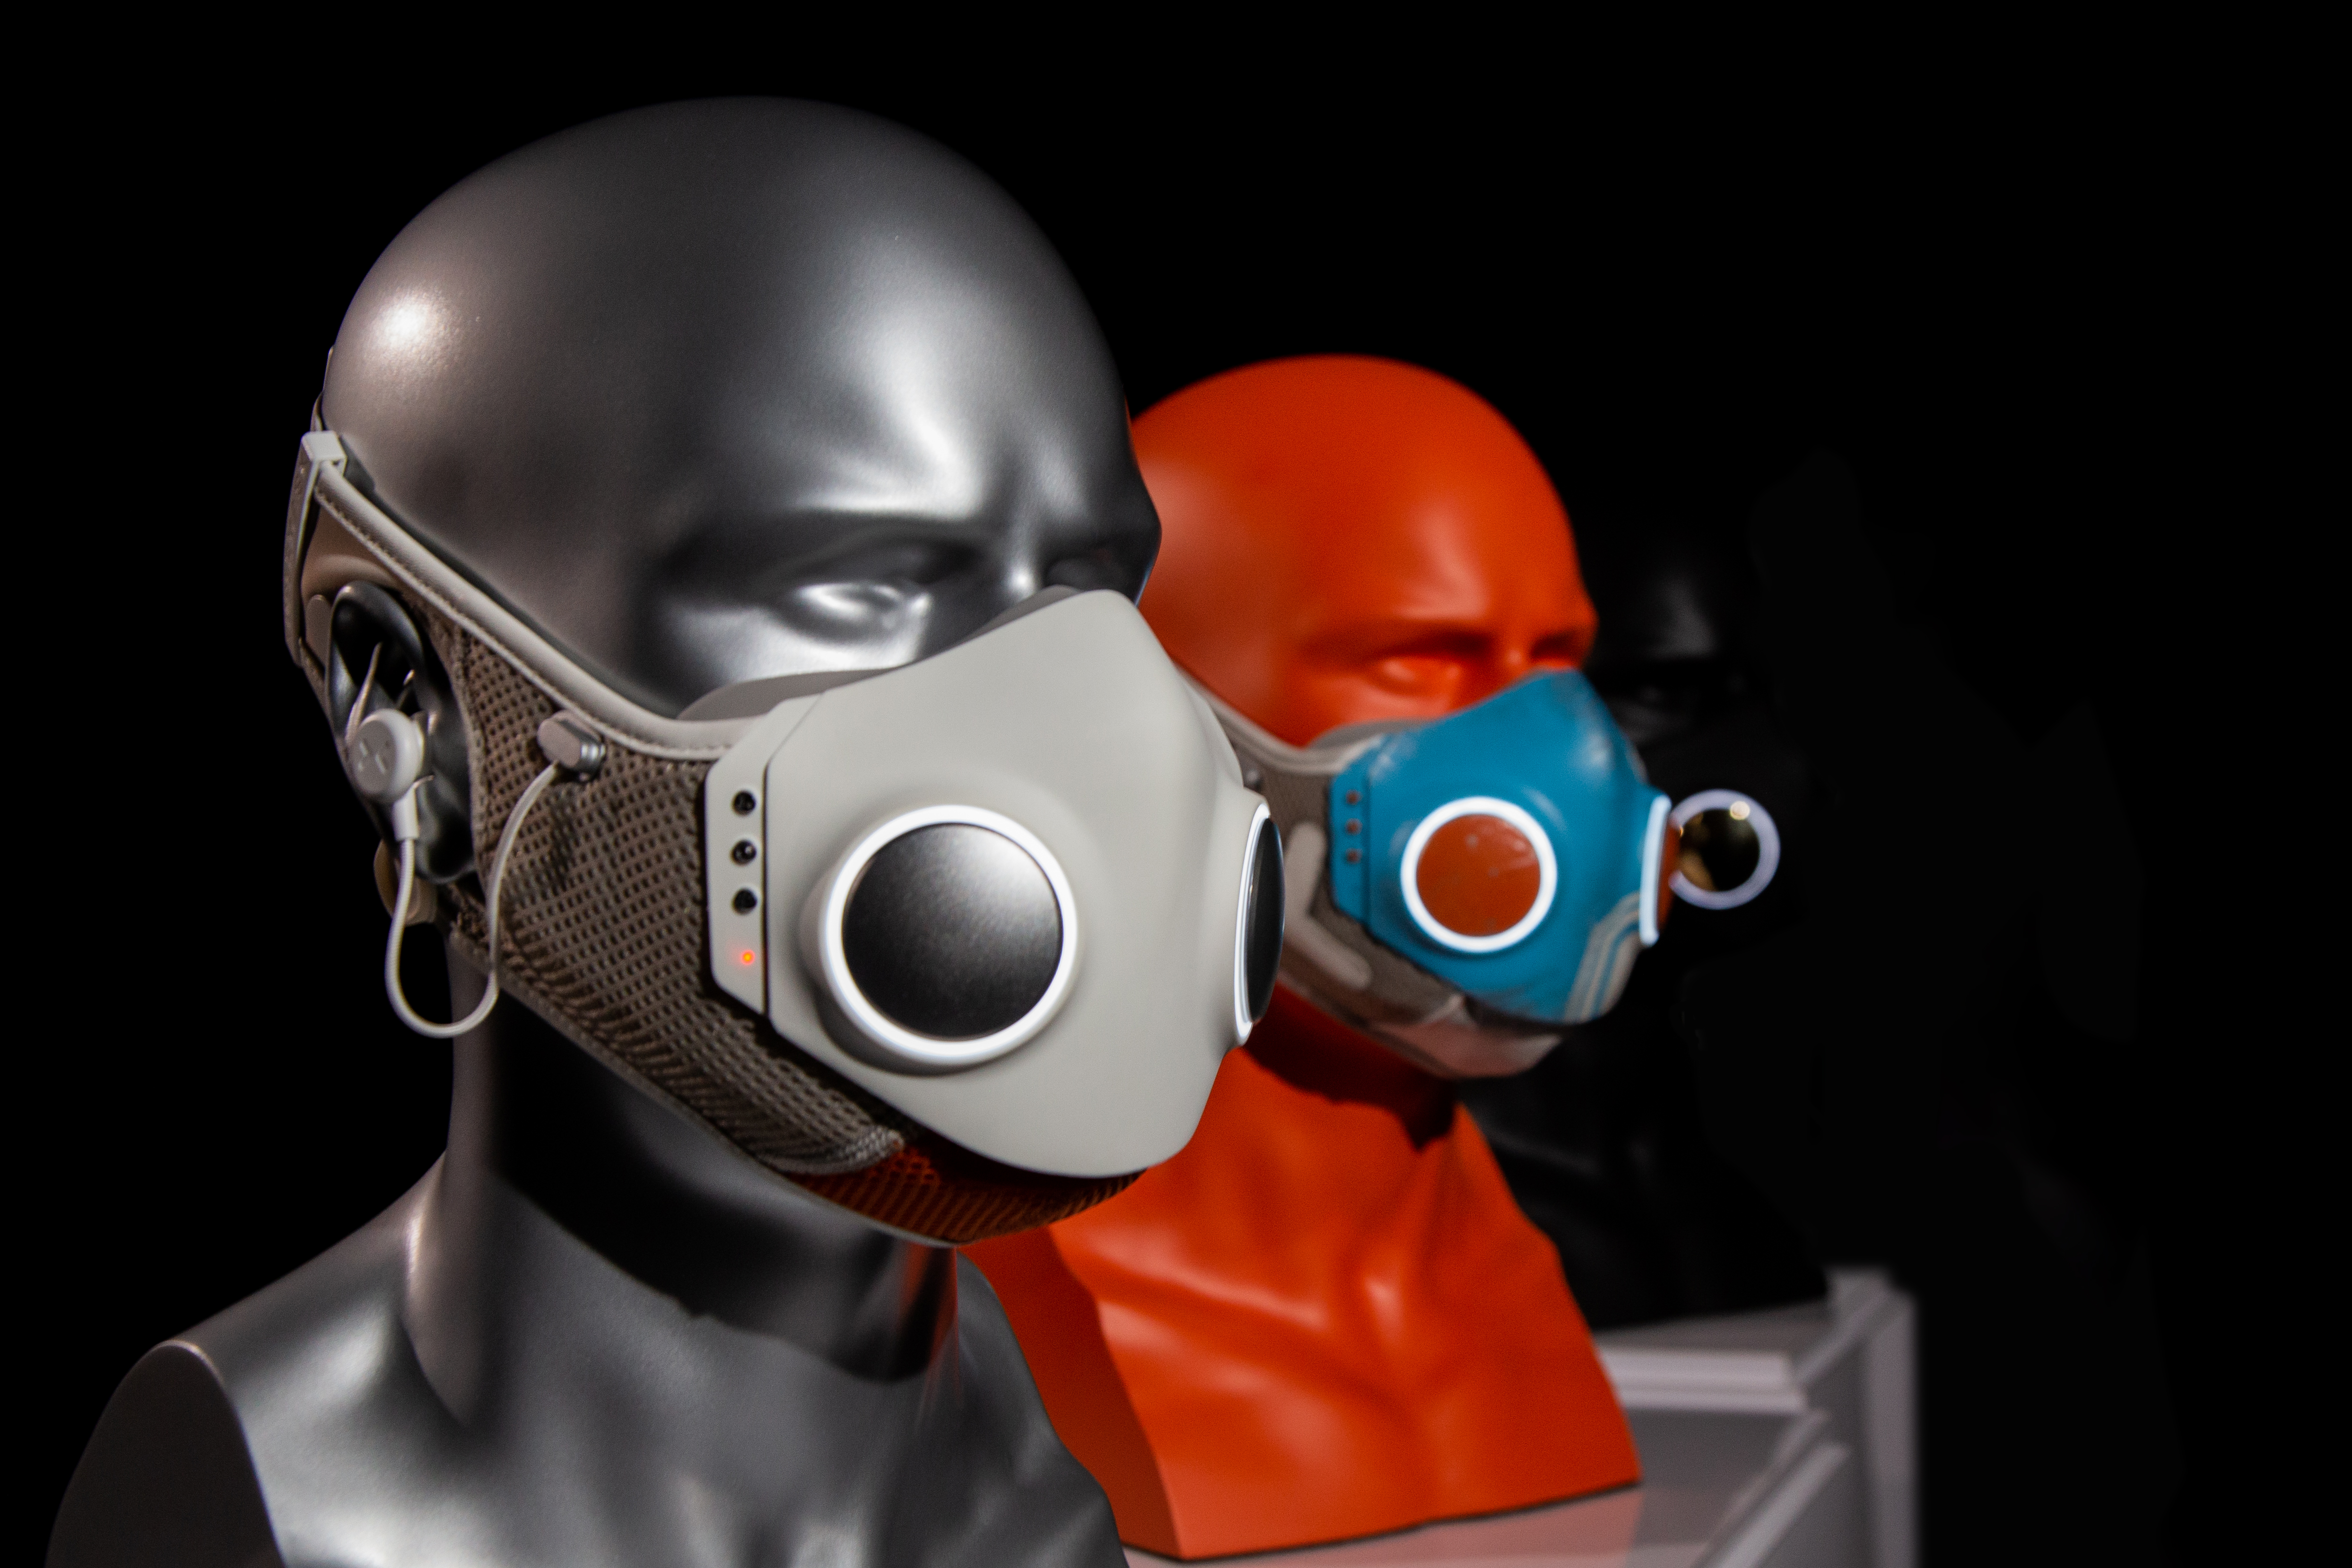 Mannequin heads with futuristic face masks 